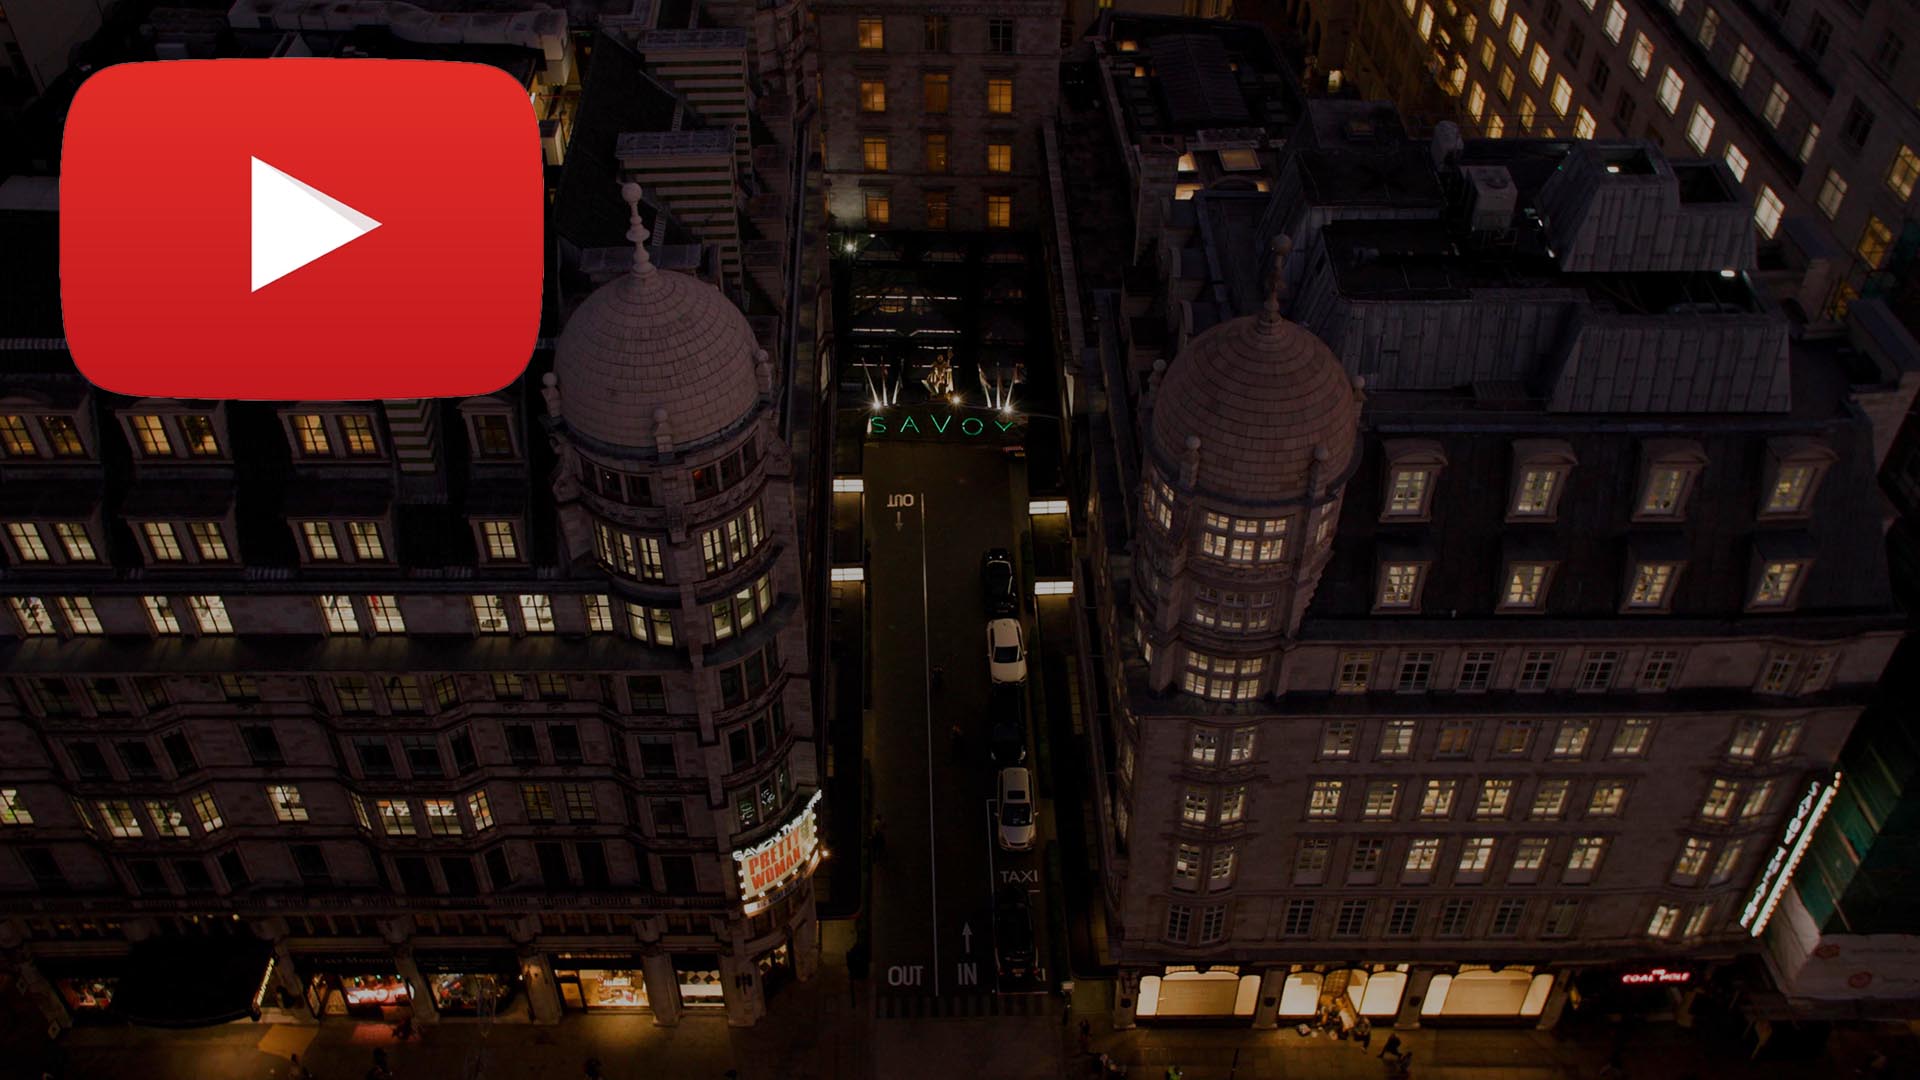 Altitude Aerial Photography Ltd's work on the ITV series The Savoy